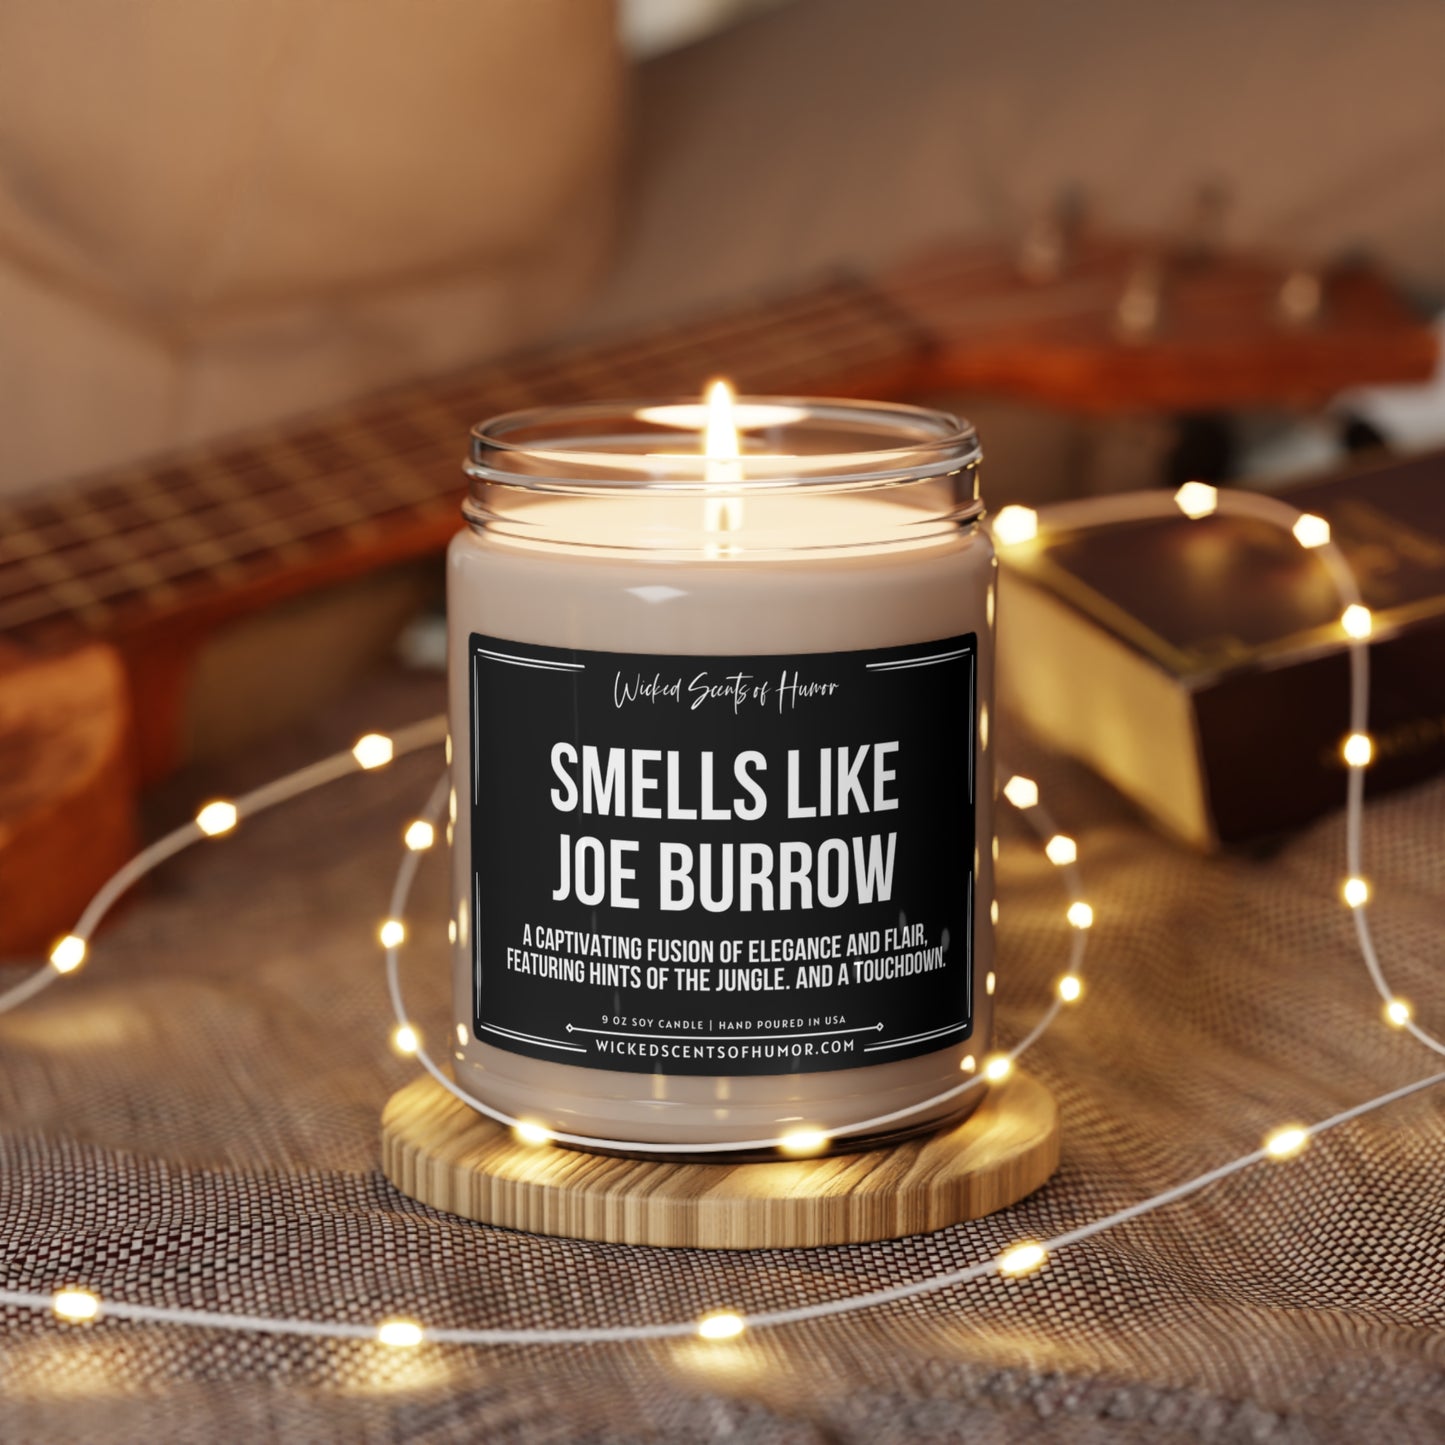 Smells Like Joe Burrow Candle, Football NFL Candle, Bengals Inspired, Man Cave Candle, Unique Gift Idea, Athlete Inspired Scent